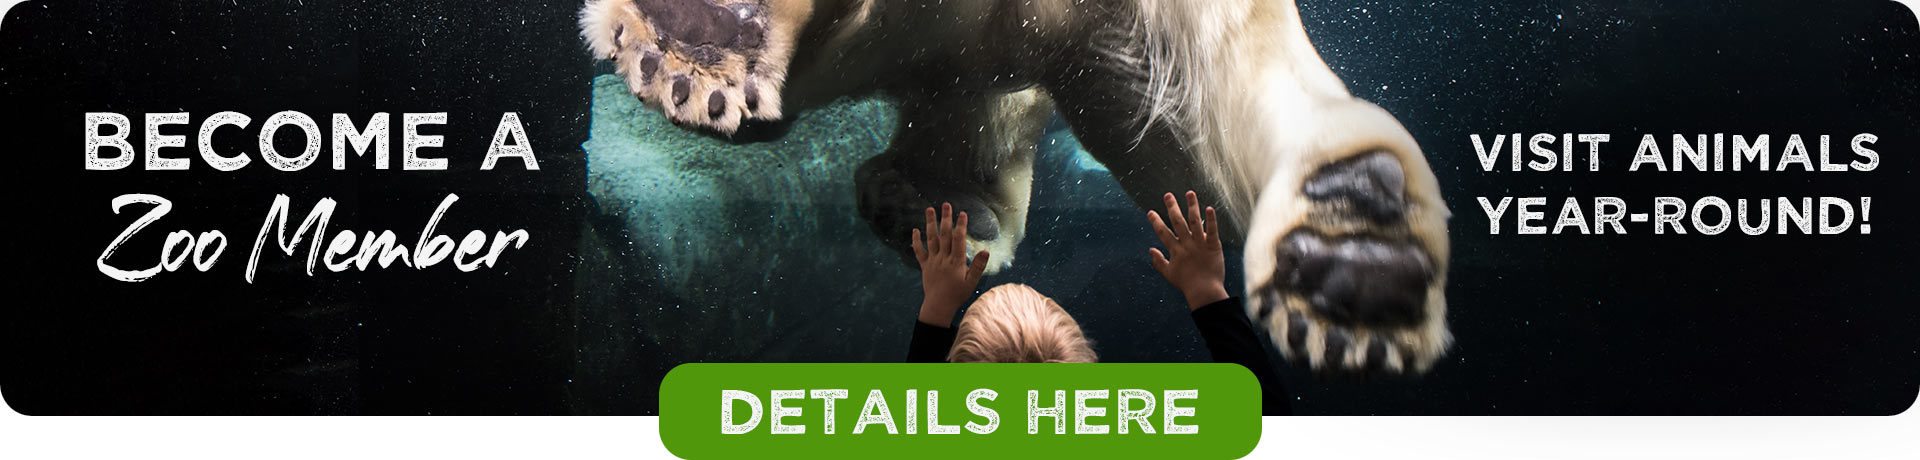 A boy has his hands on the glass as a polar bear pushes away with it's back paws. BECOME A ZOO MEMBER! Visit Animals Year-Round! Details Here!